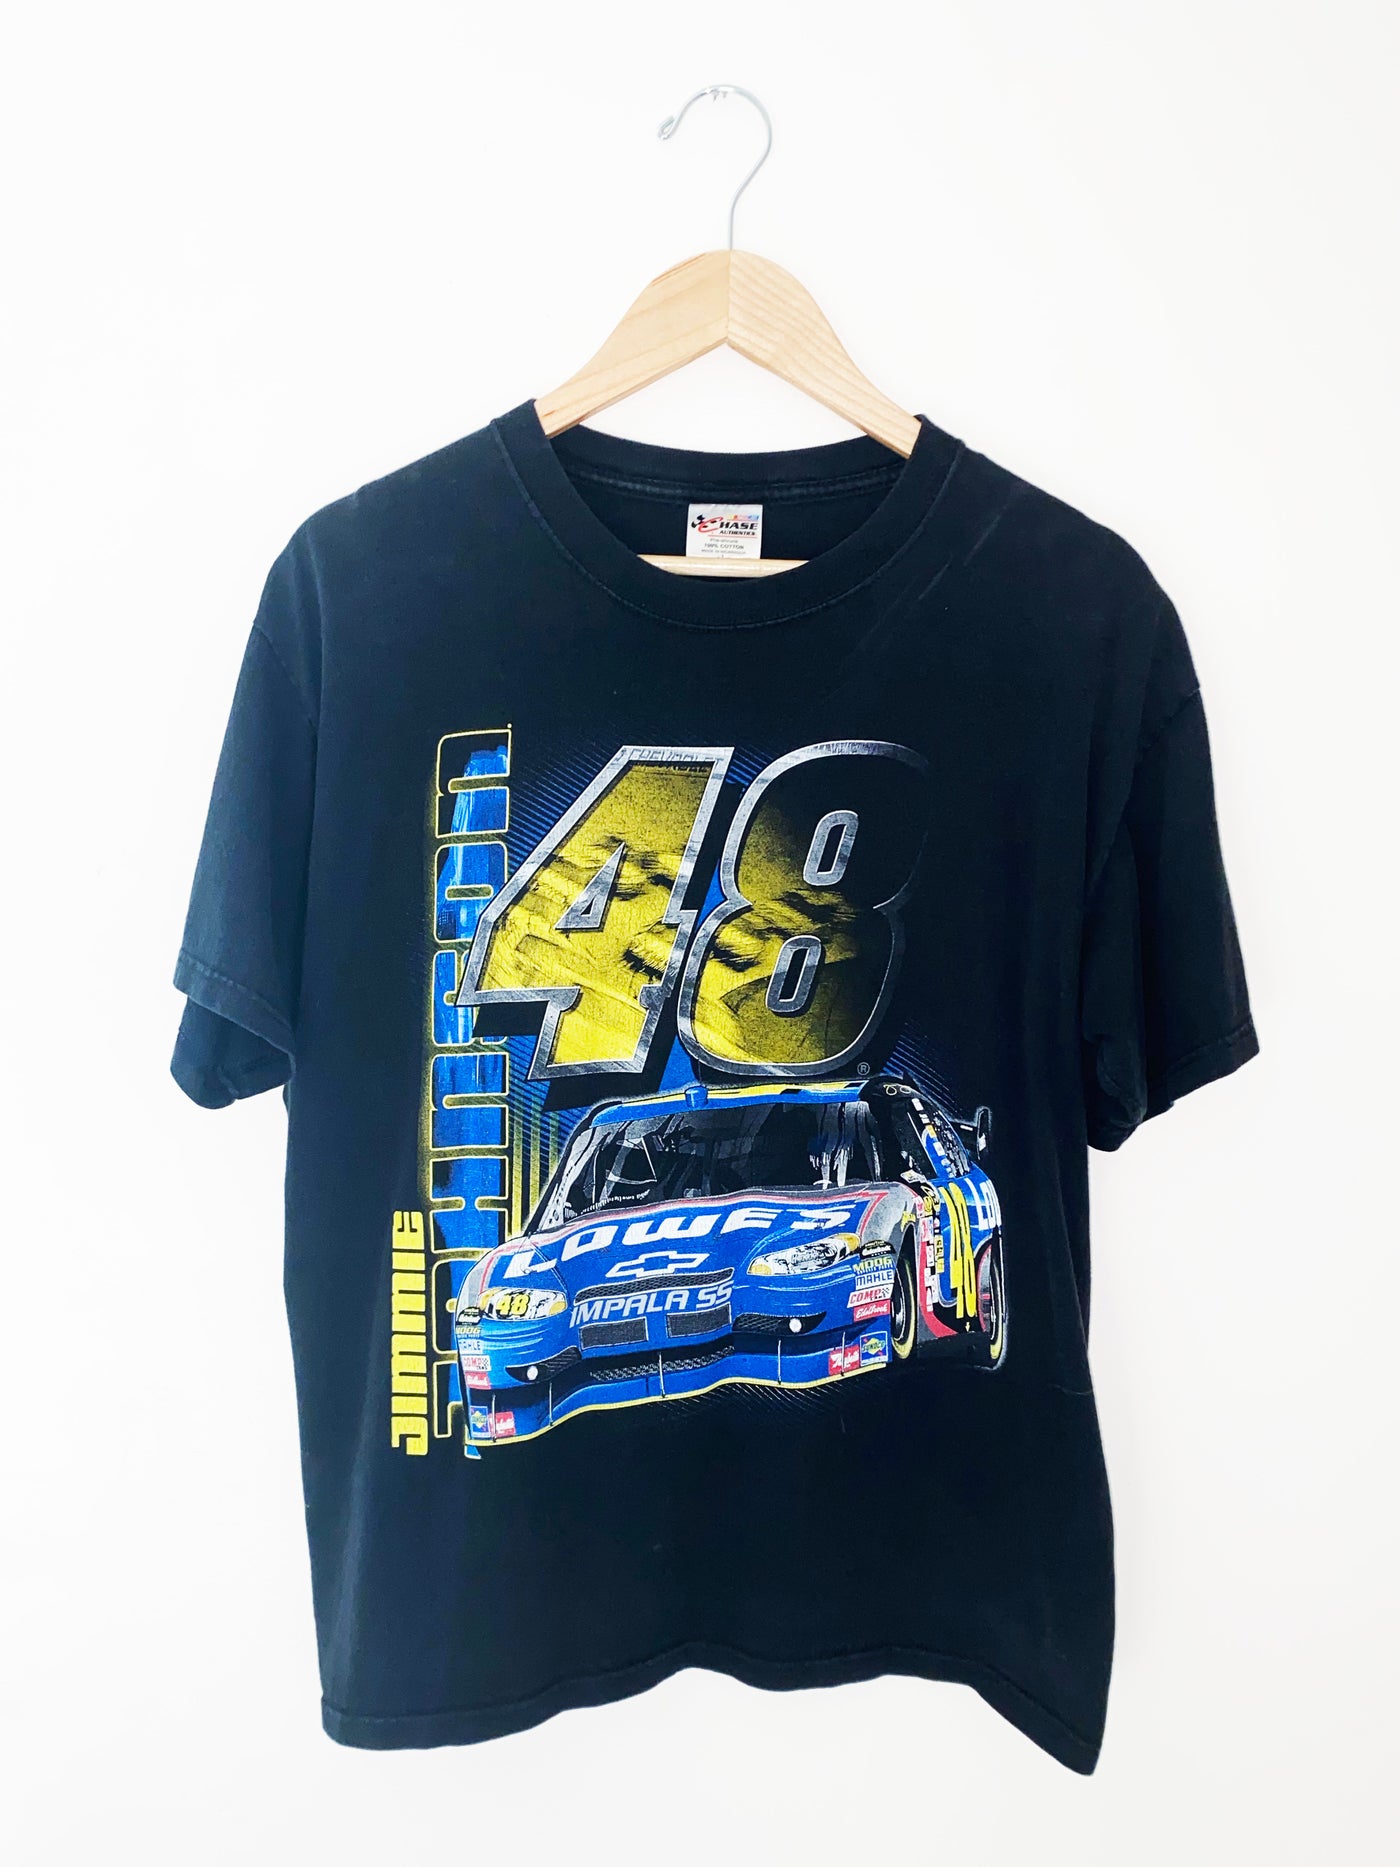 2008 Chase Authentic’s Jimmie Johnson Nascar T-Shirt